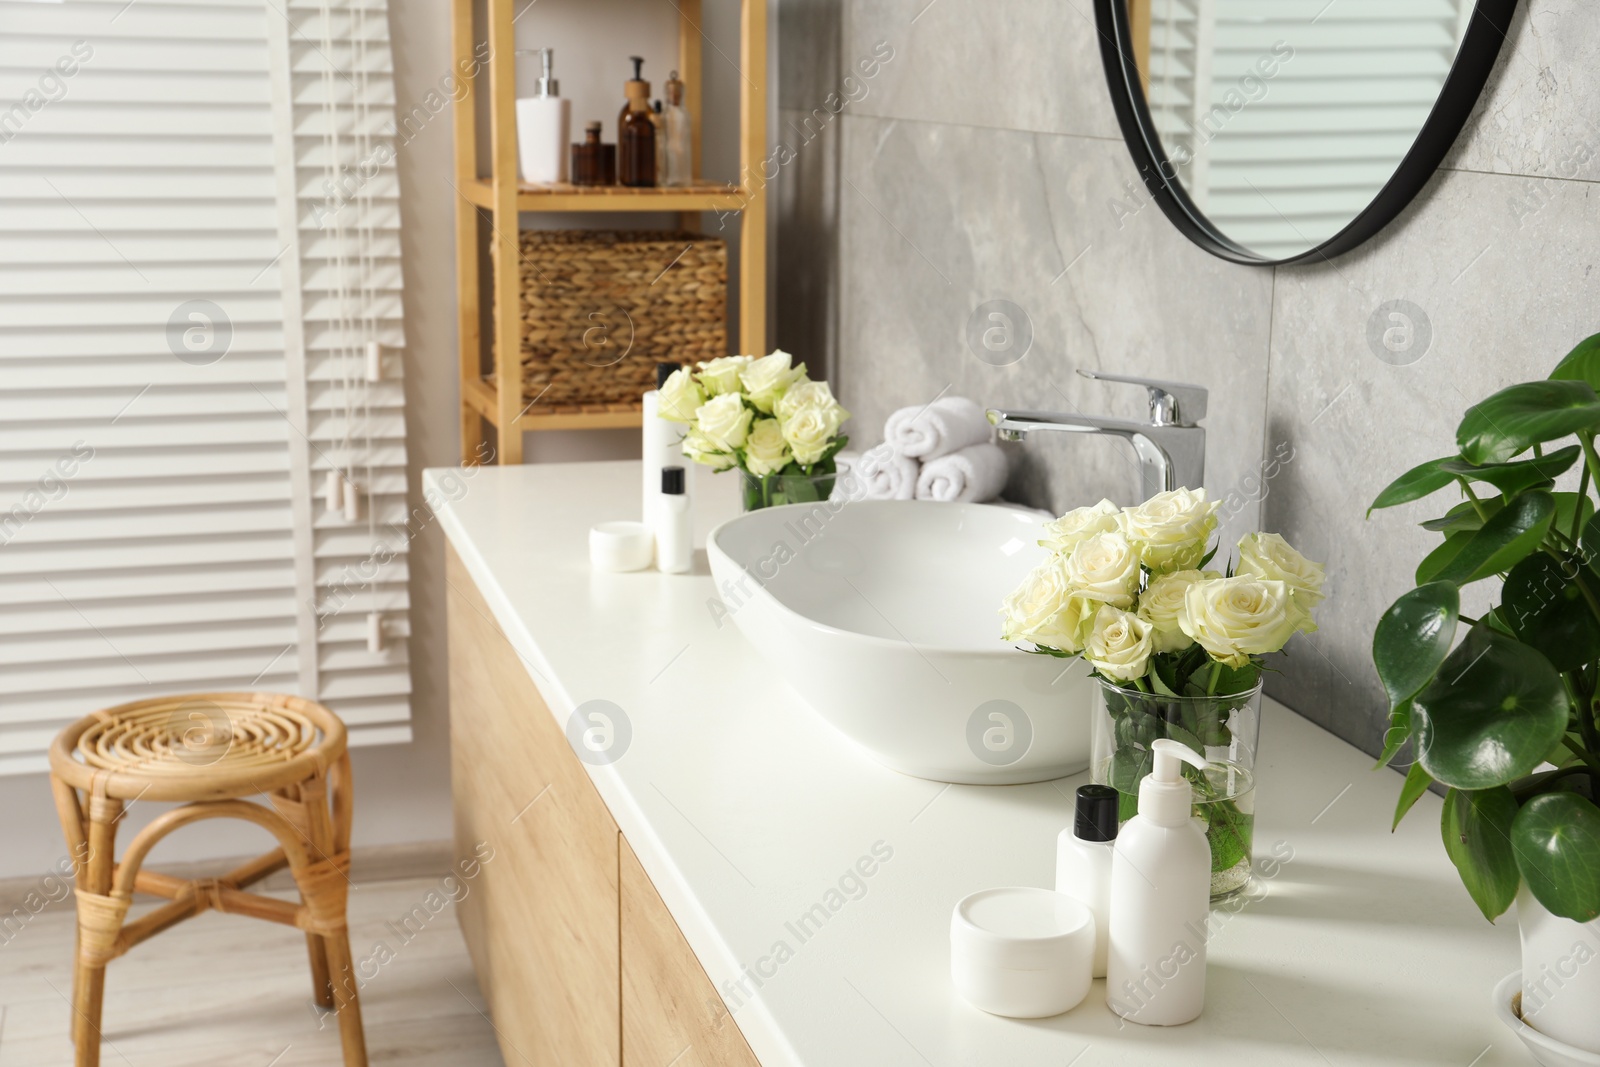 Photo of Beautiful roses and bath accessories near sink in bathroom